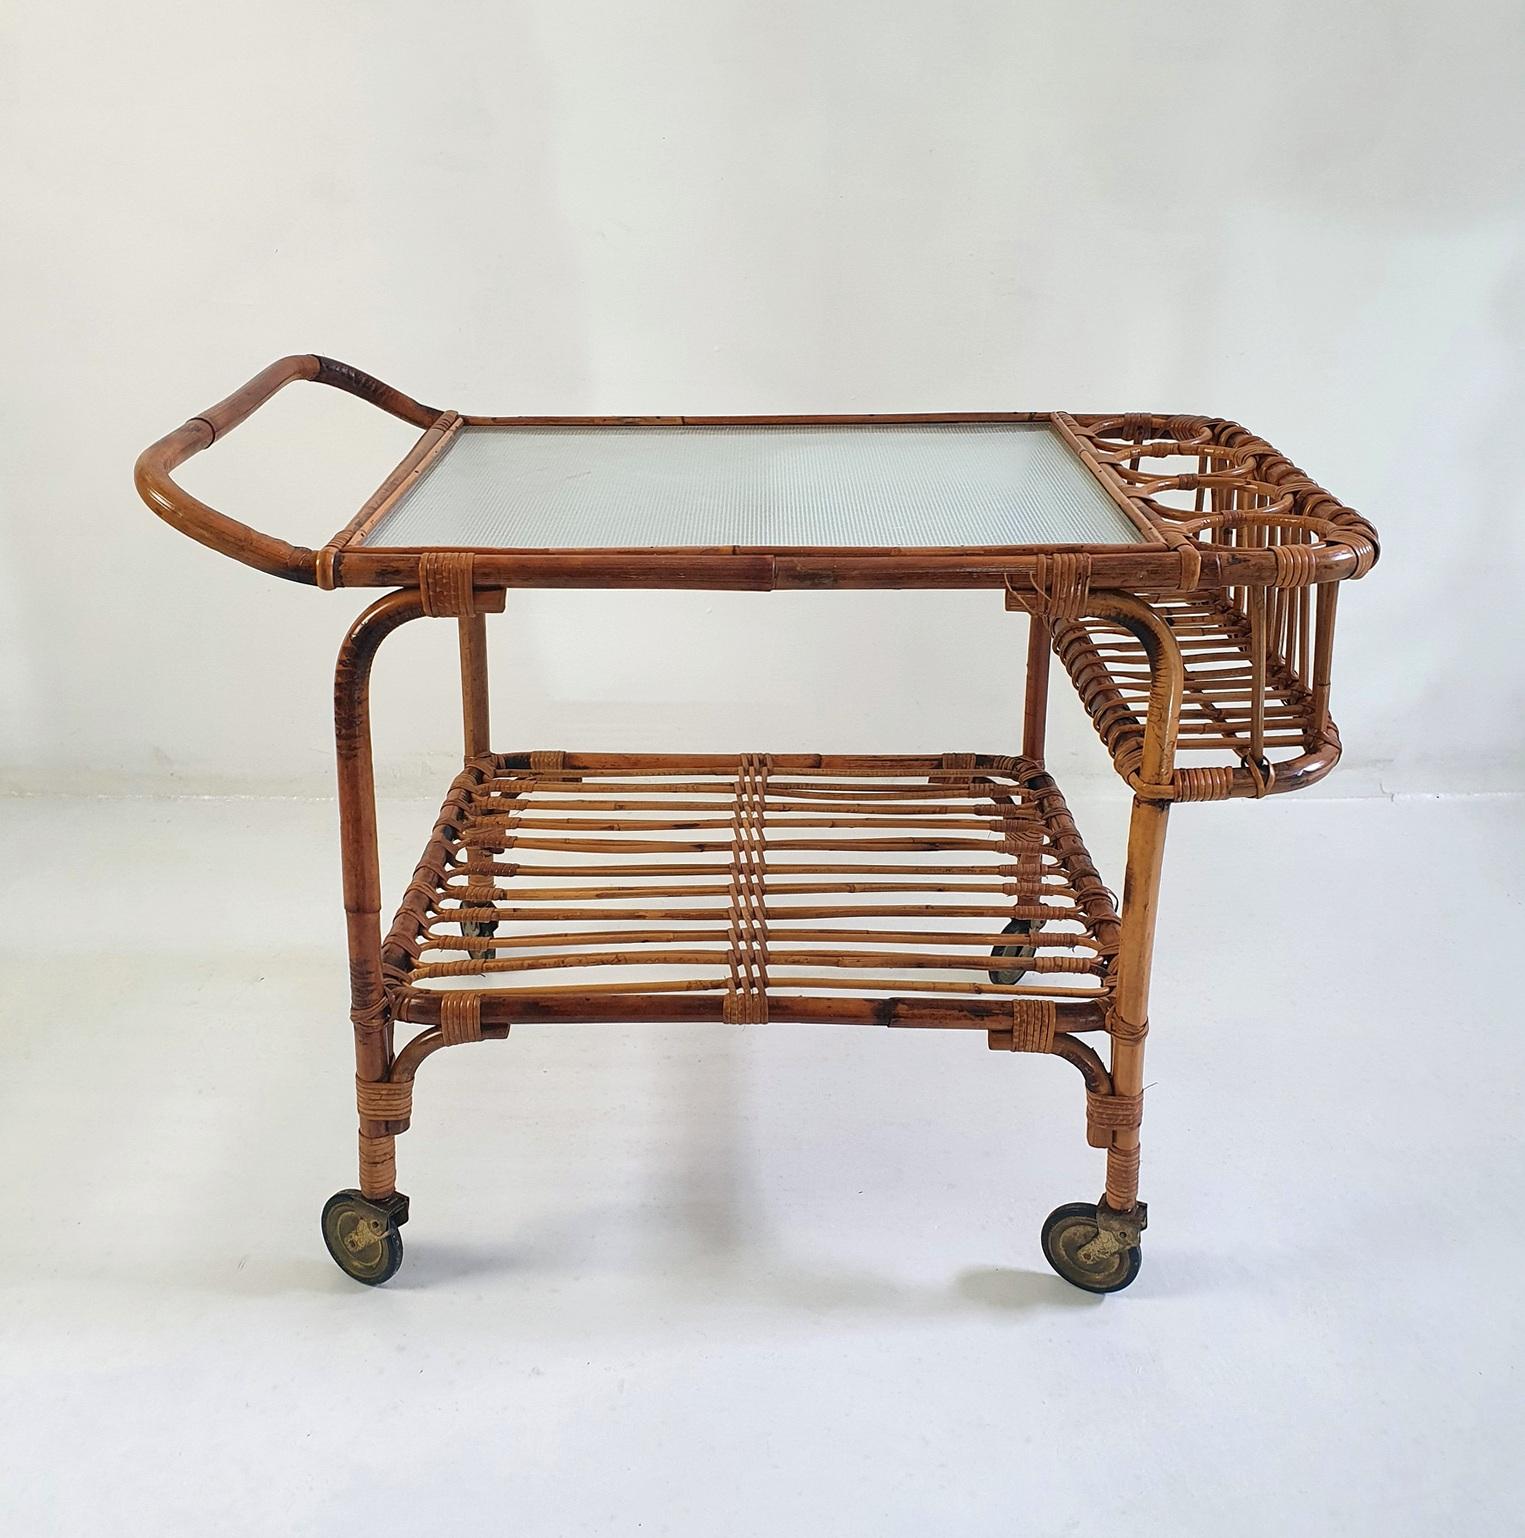 A rare rectangular Italian two tiered bar cart from the 1950's made from bamboo and rattan. The top is made from sturdy glass which is a benefit when mixing drinks. Can hold up to four bottles. Retains the original castors and has an overall nice